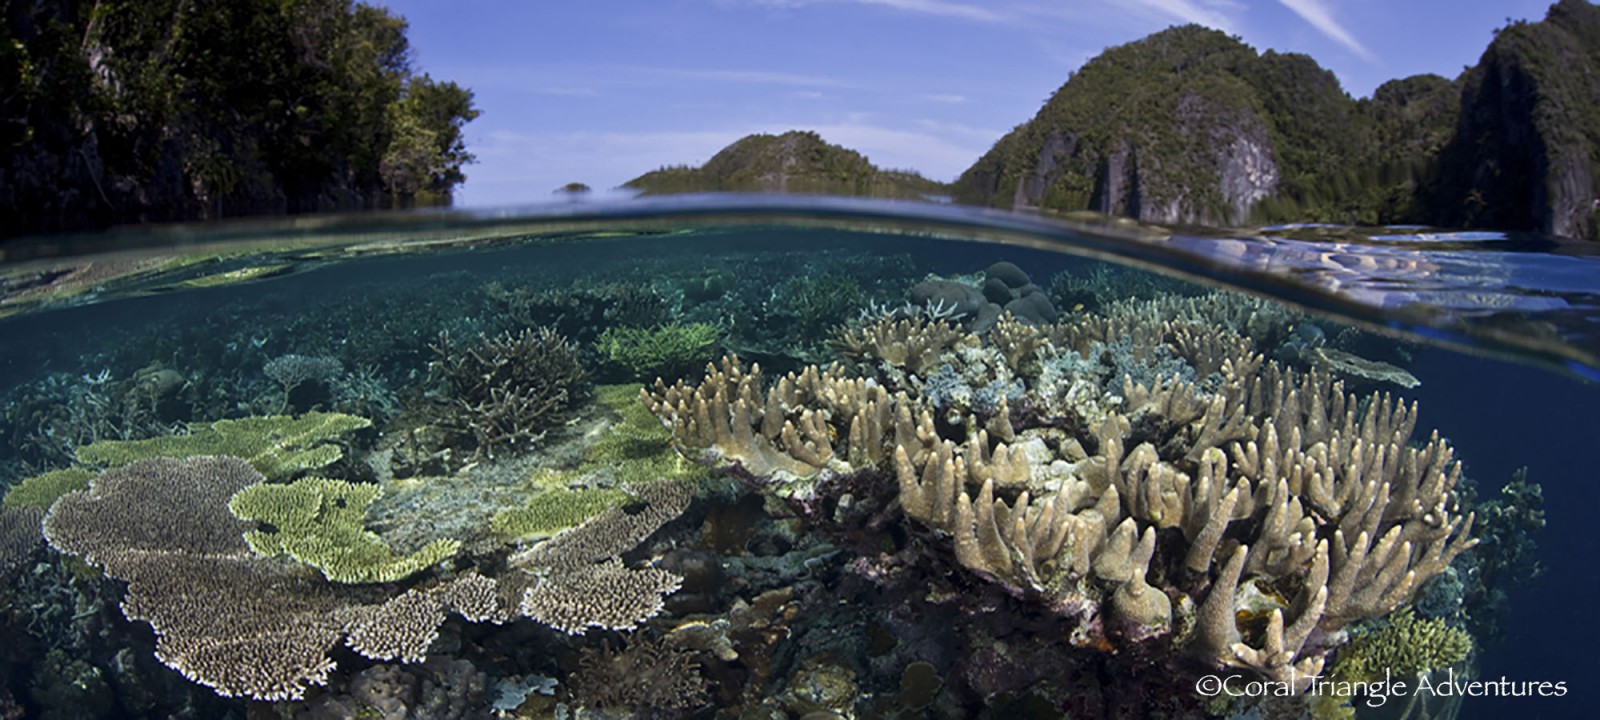 coral-triangle-adventures-10.jpg